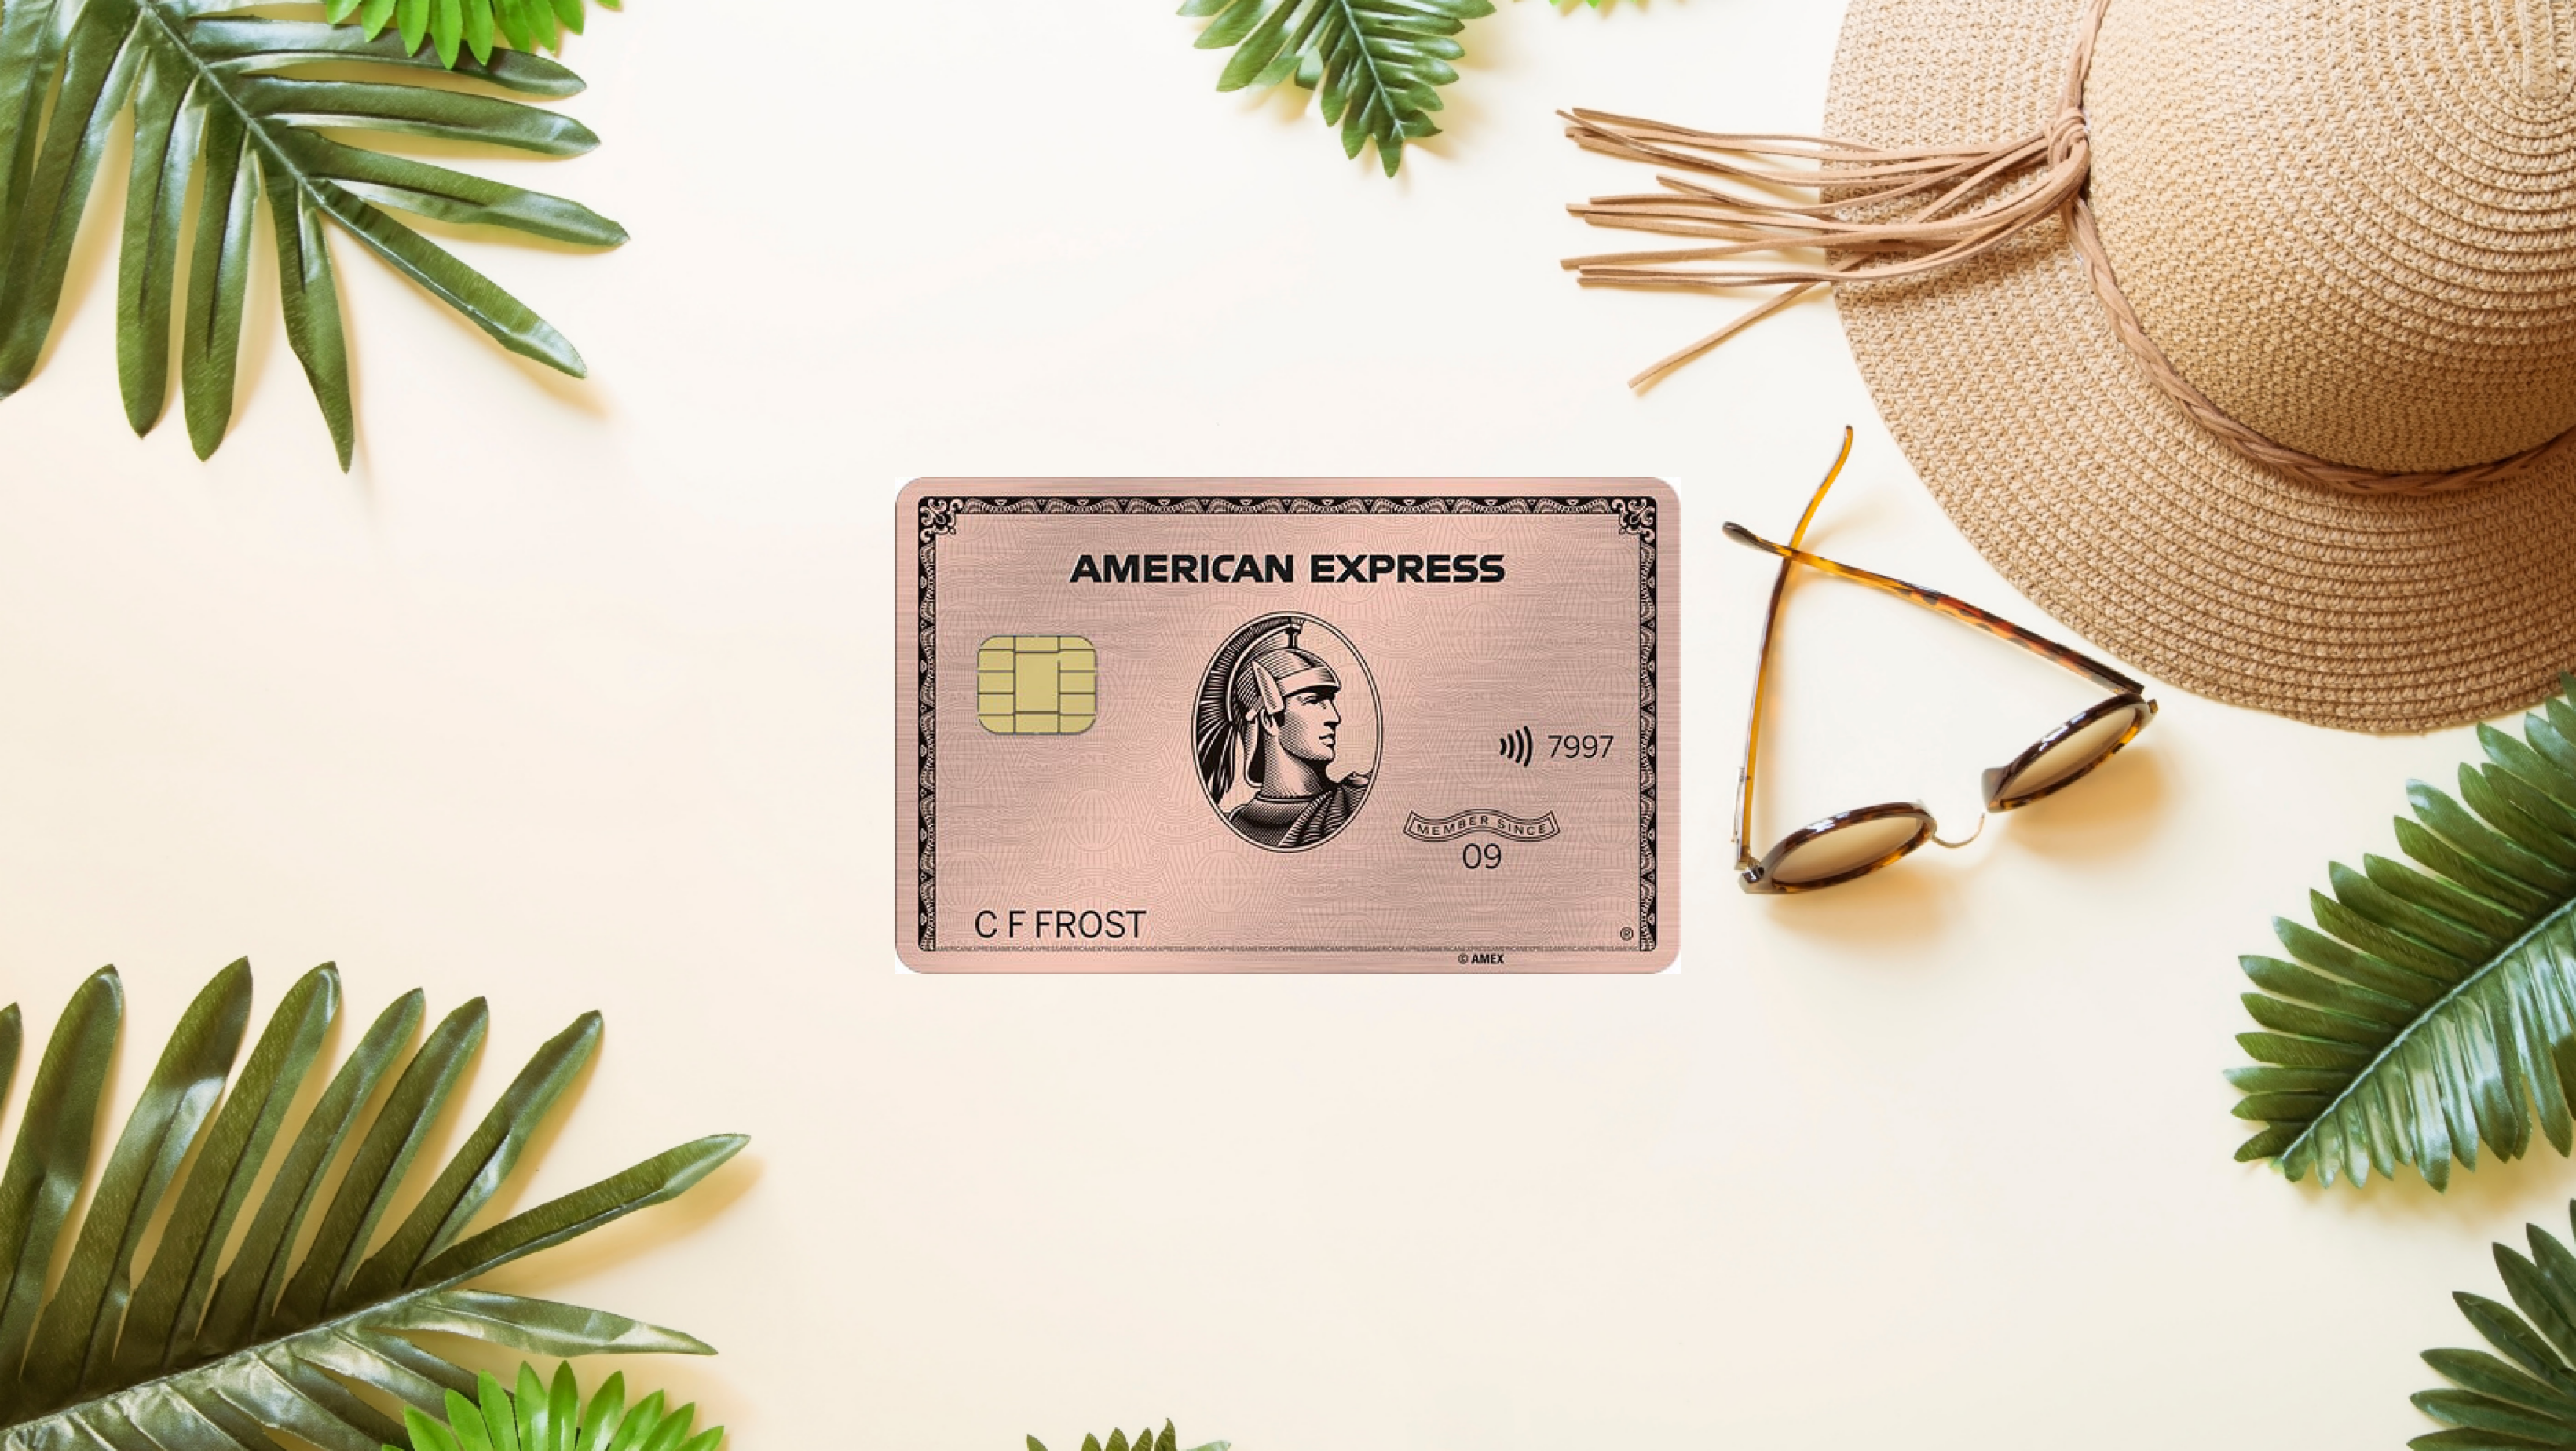 American Express Gold Card